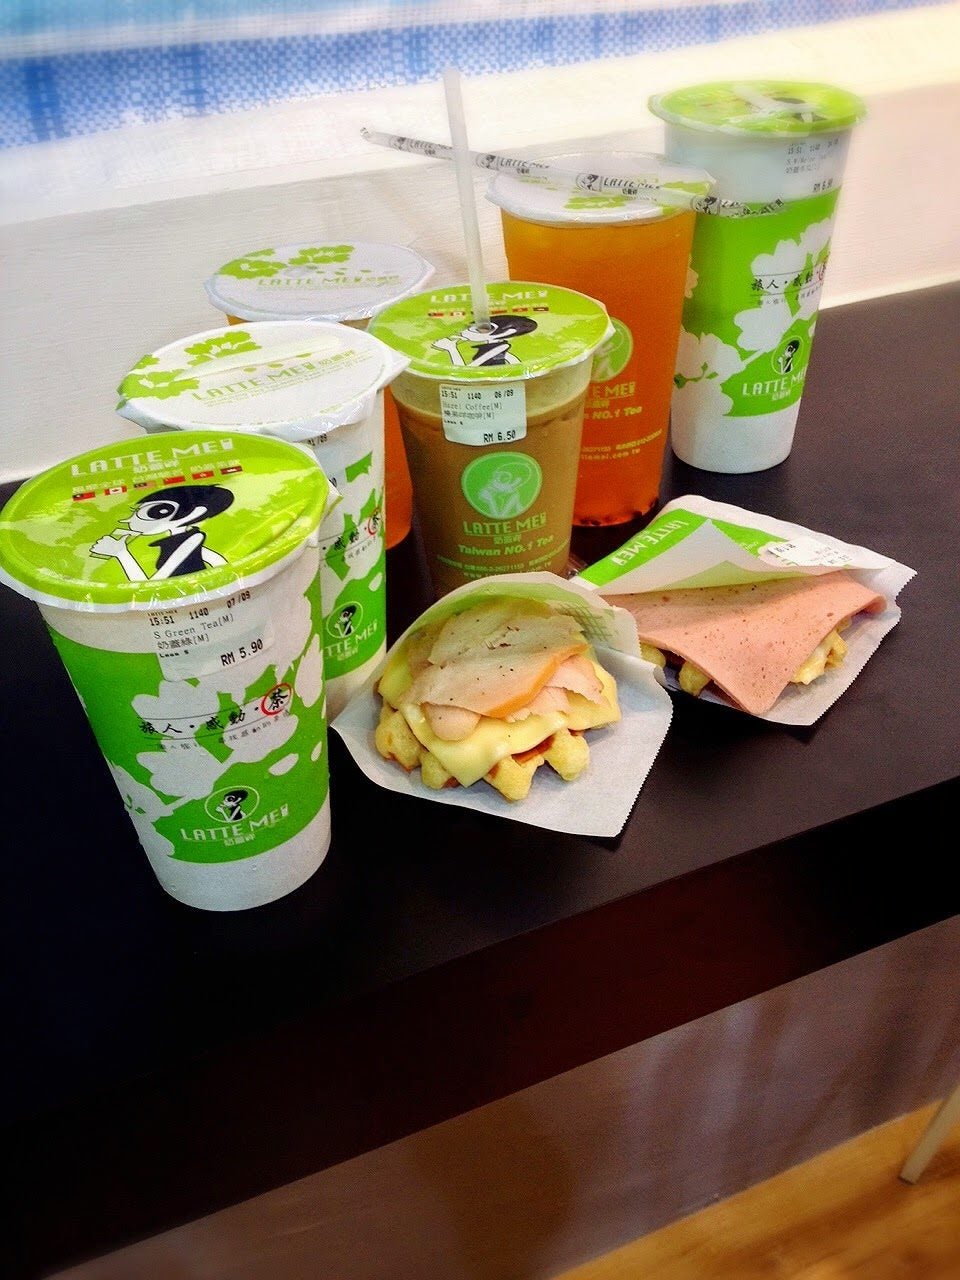 8 Best Alternative Bubble Tea In Kl Aside From Chatime You Can Try - World Of Buzz 21